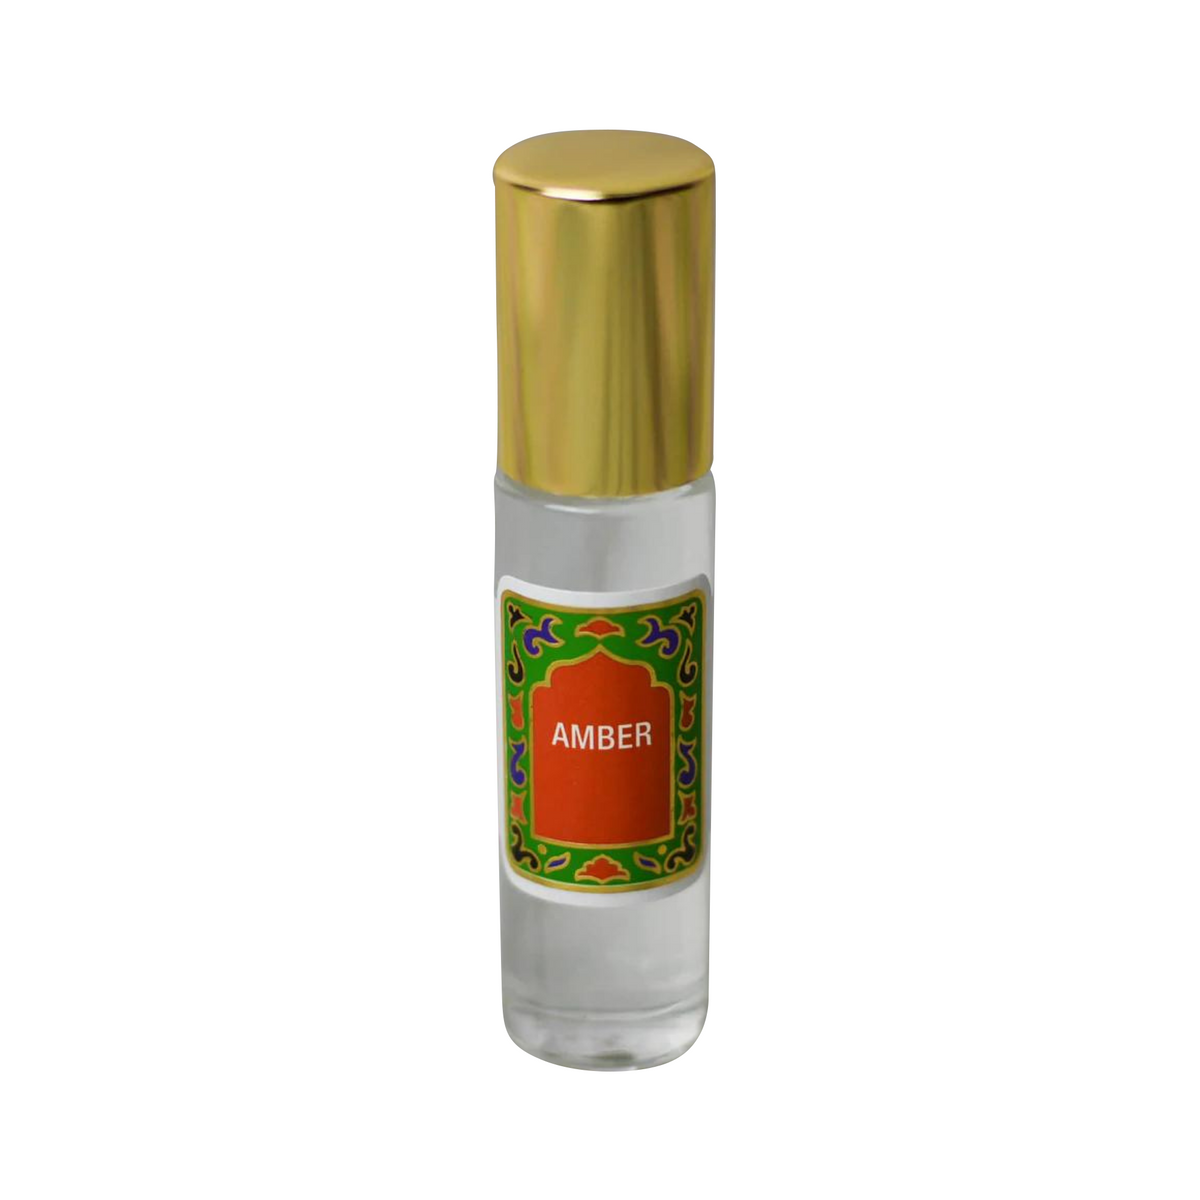 Primary image of Amber Fragrance Roll-On